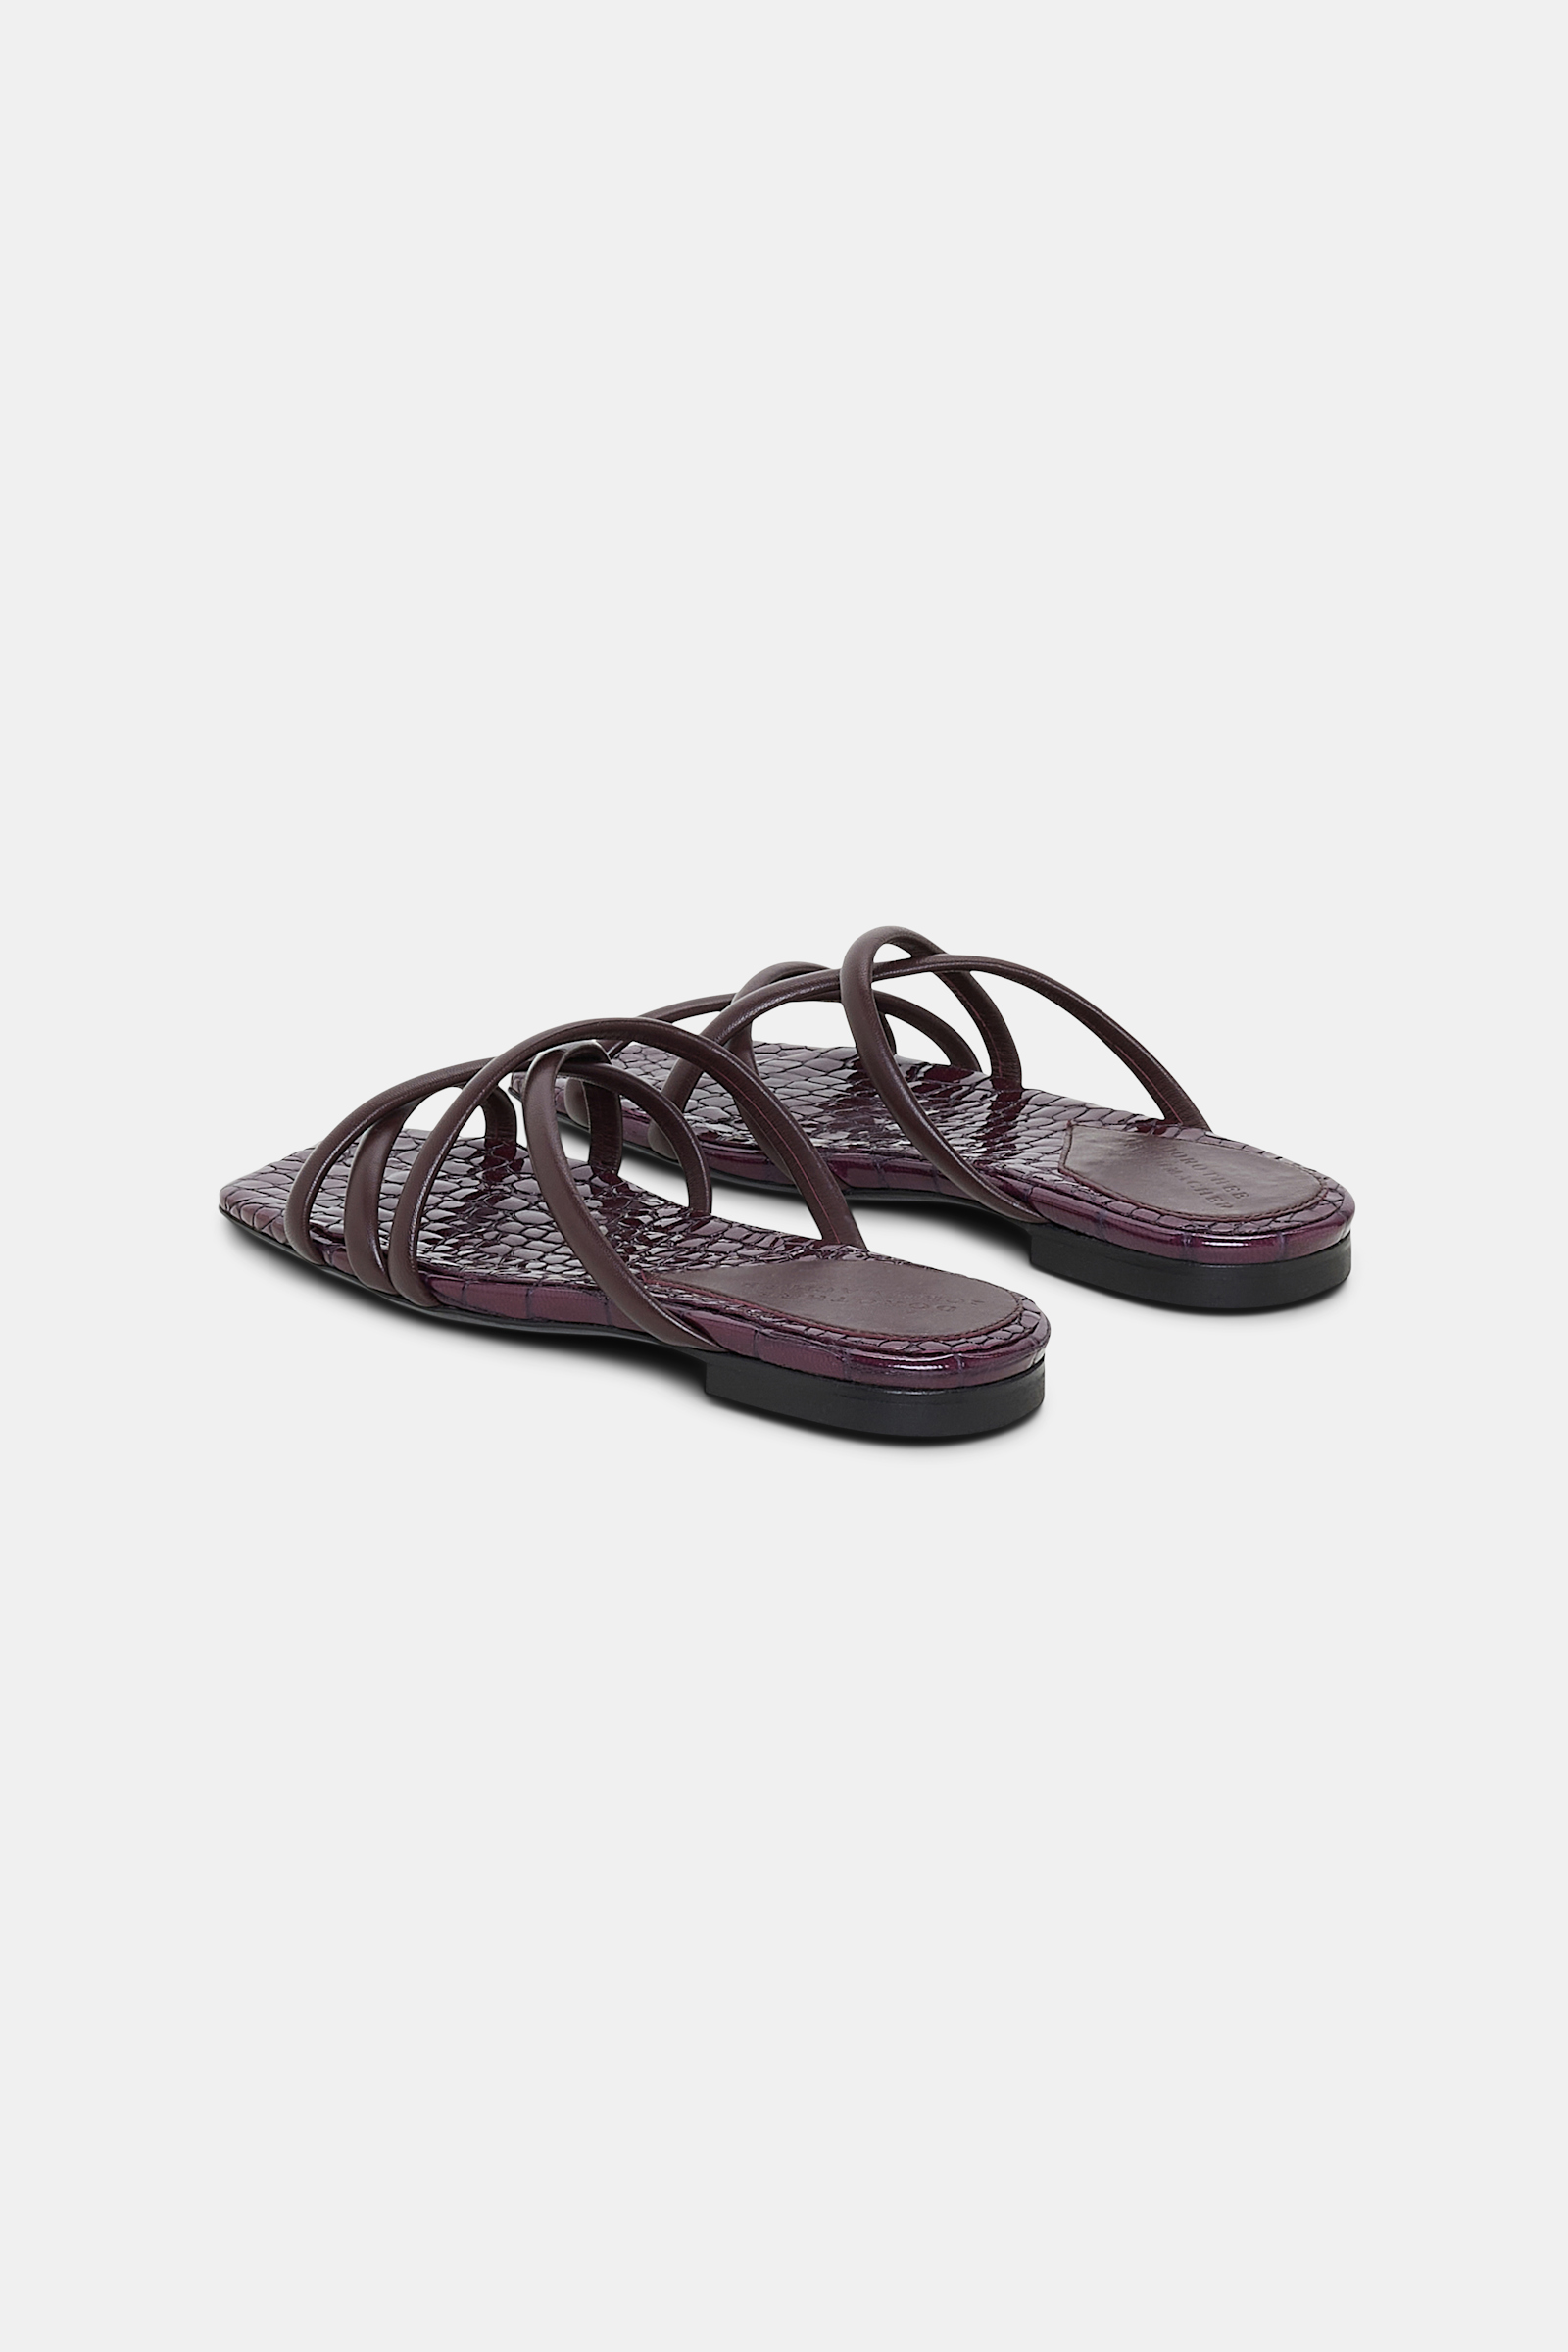 Dorothee Schumacher Square toe flat strappy sandals shimmering lilac